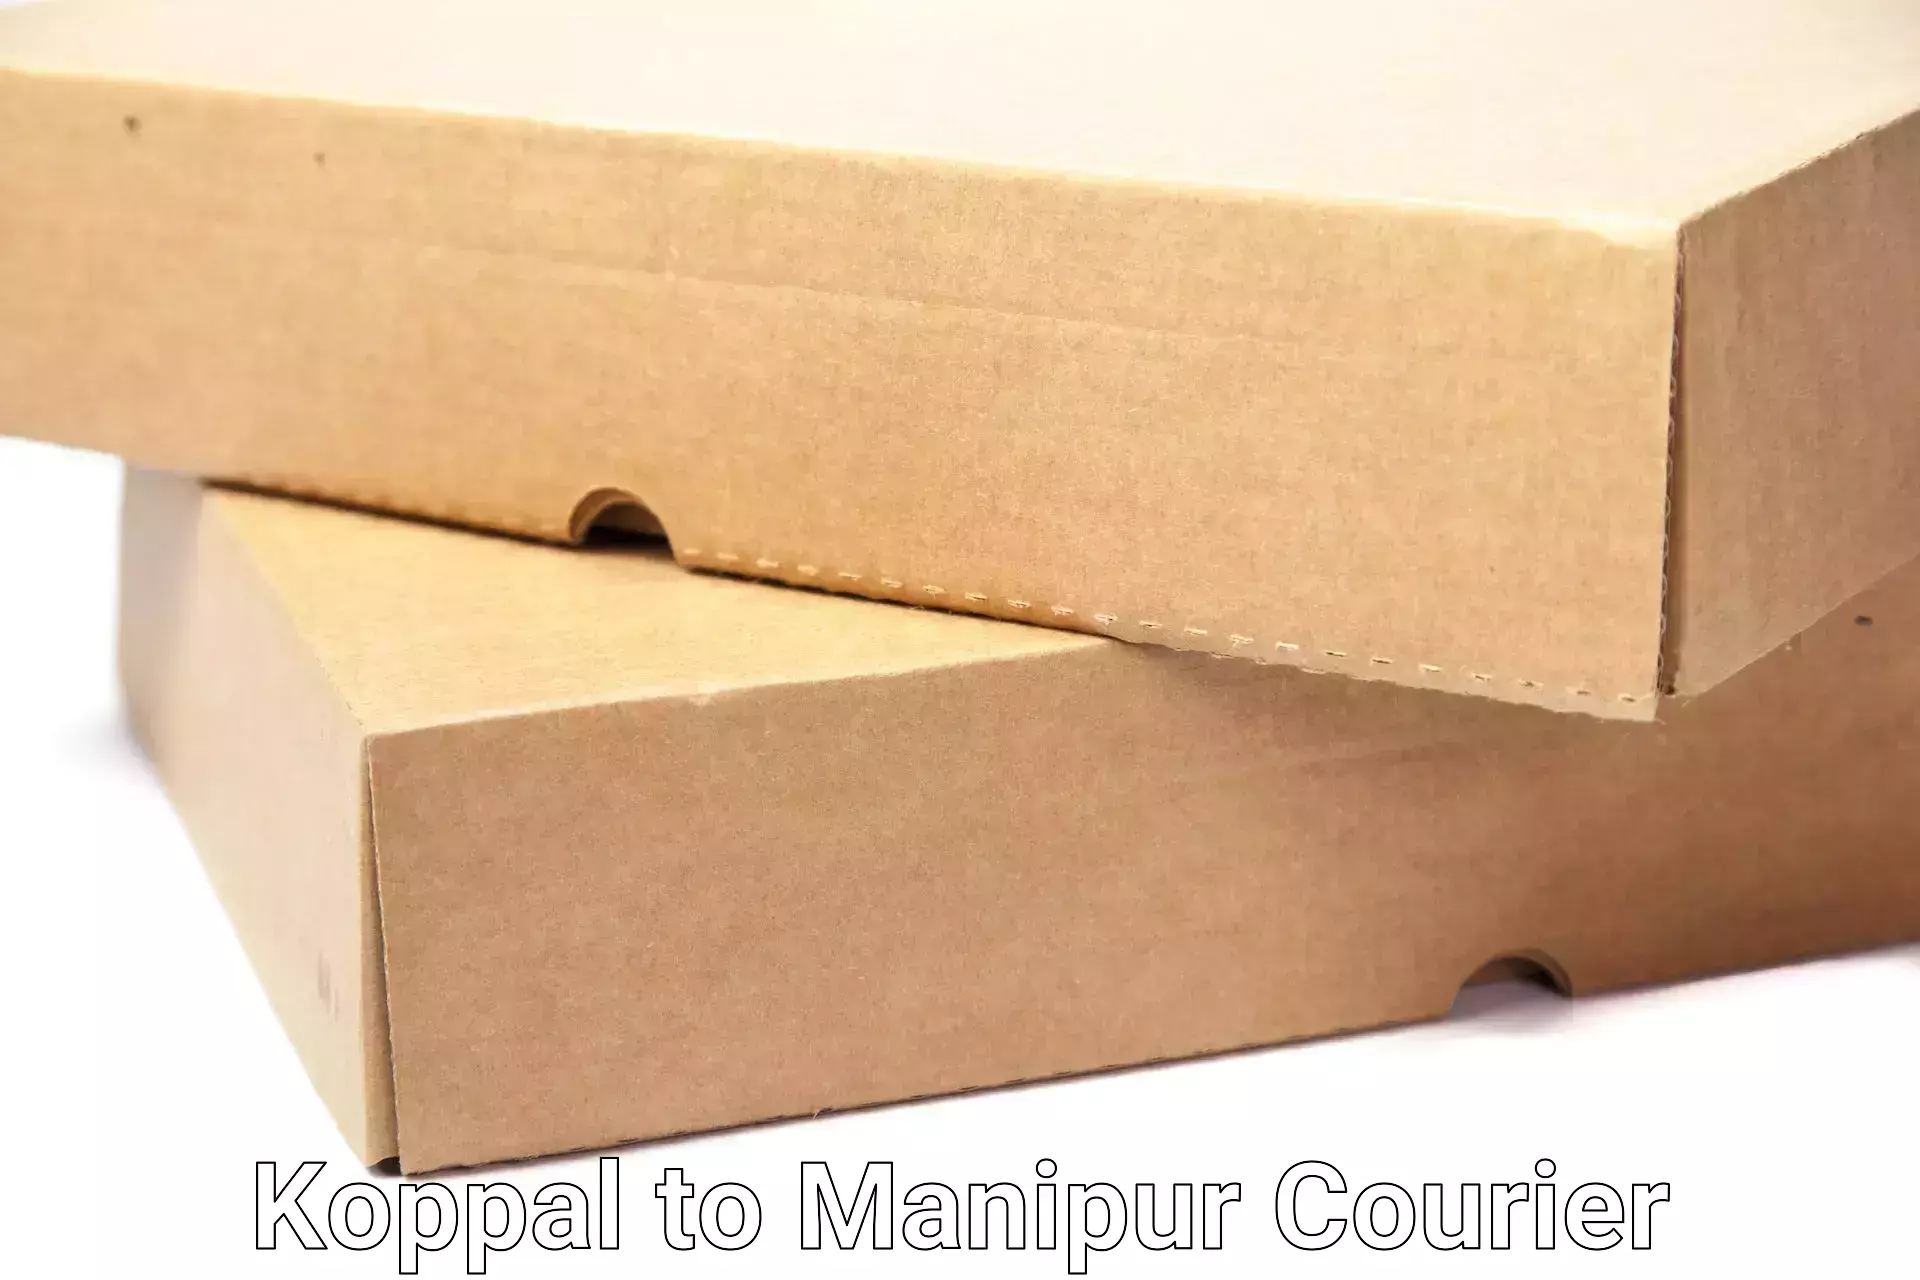 Furniture relocation experts Koppal to Chandel